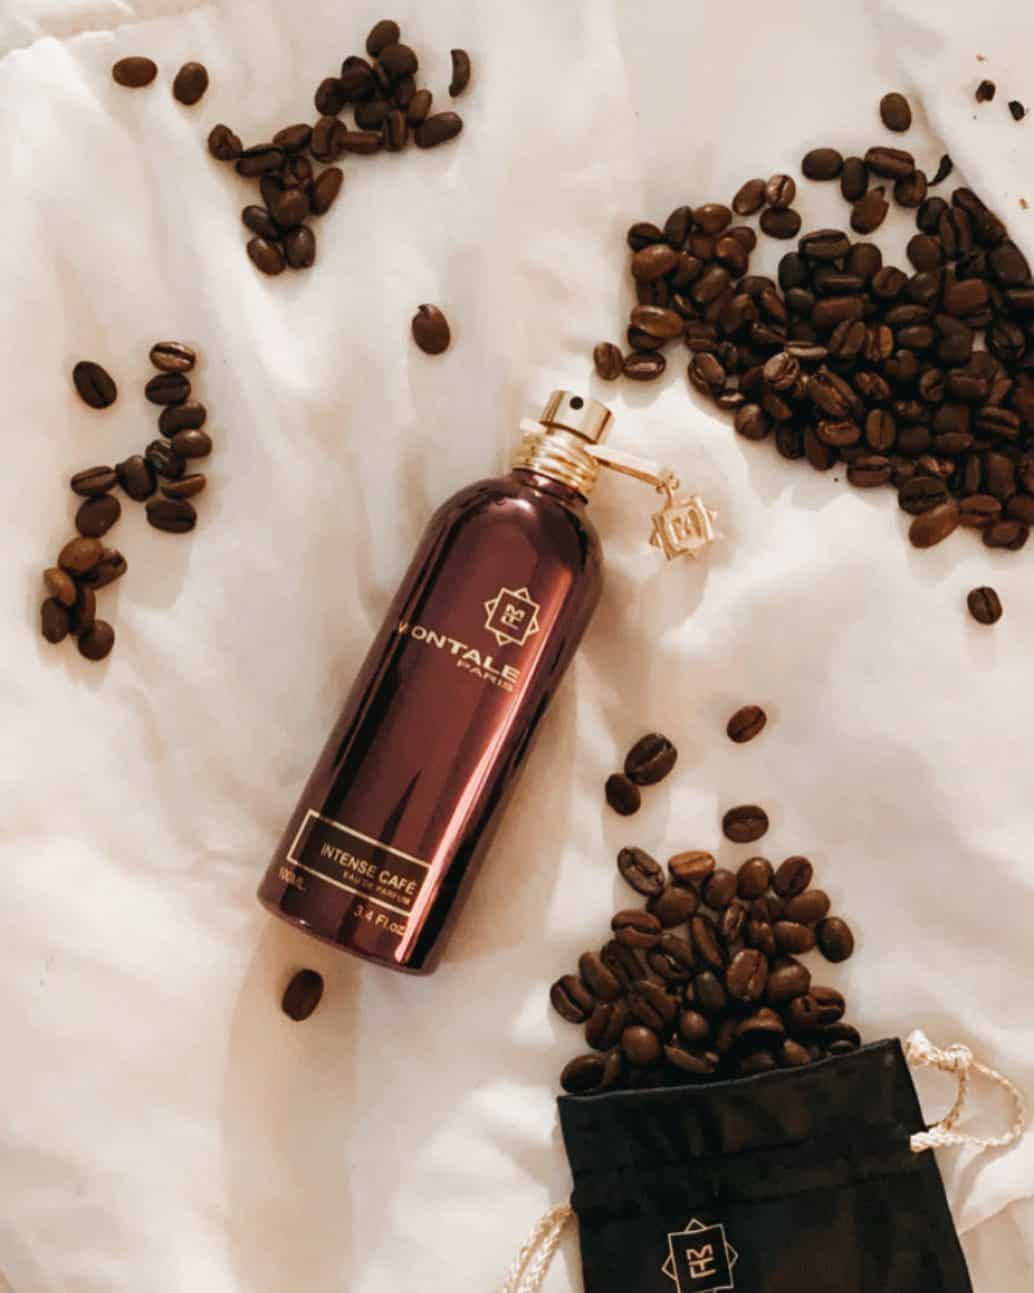 a bottle of montale intense cafe surrounded by coffee beans